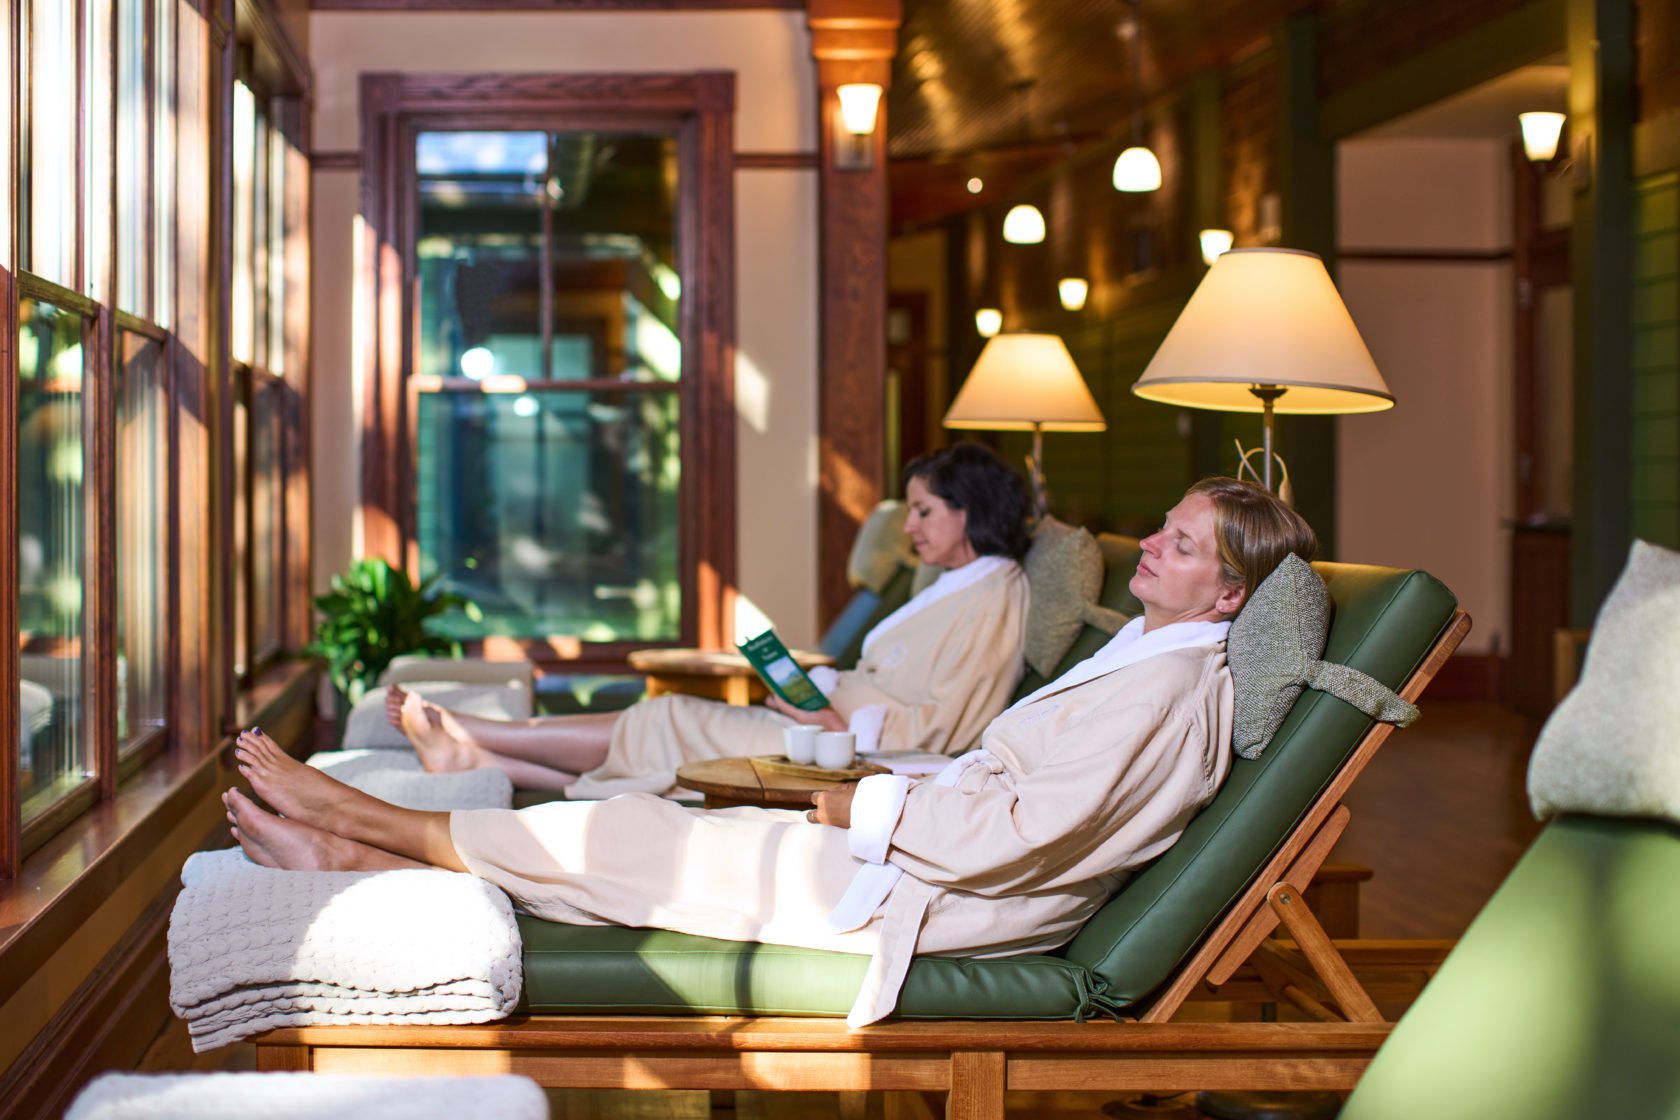 Experience Luxury Spa Treatments in the Privacy and Comfort of